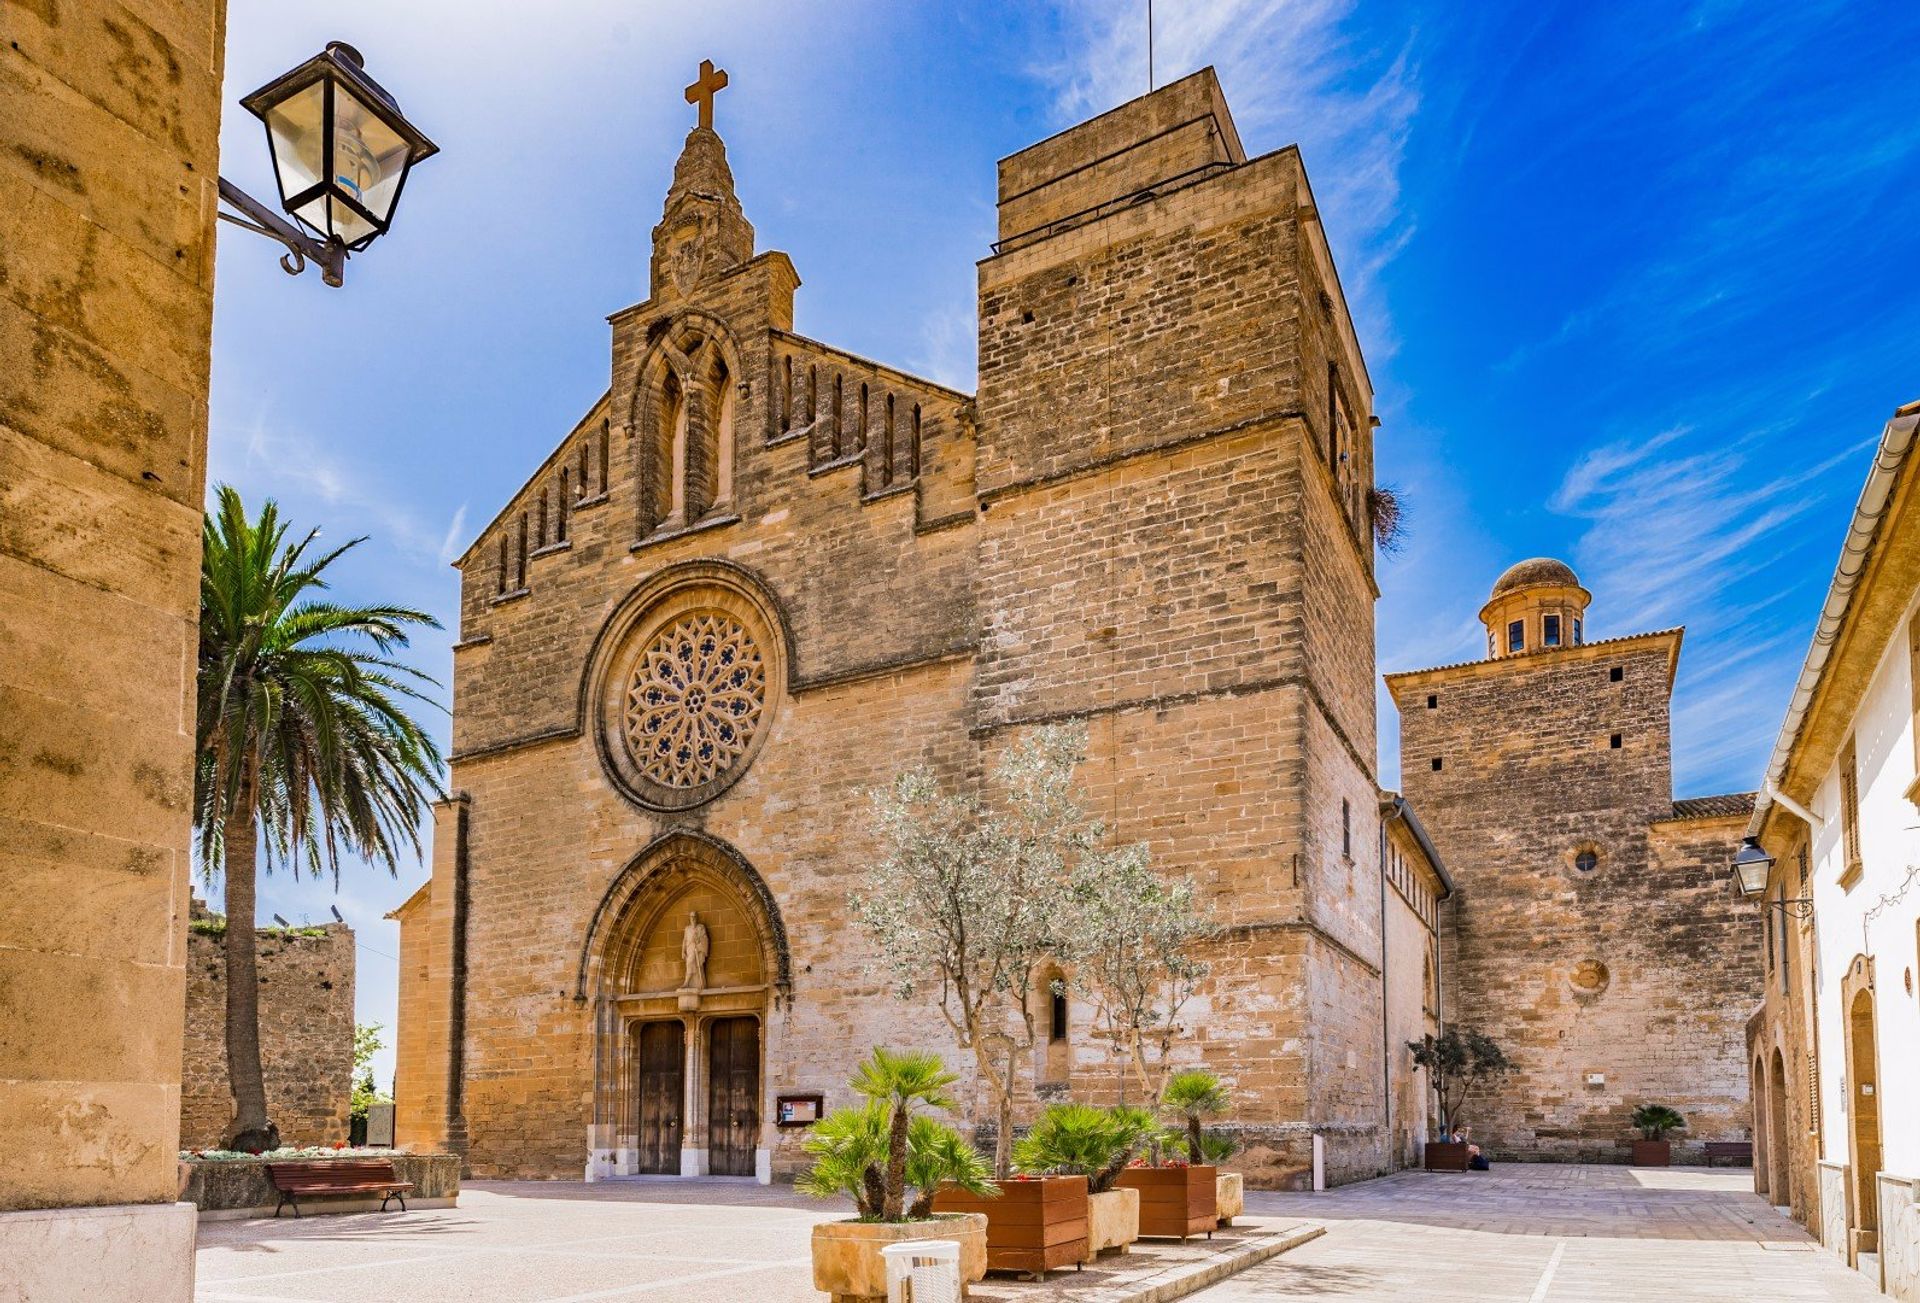 St. Jaume church in the Old Town centre